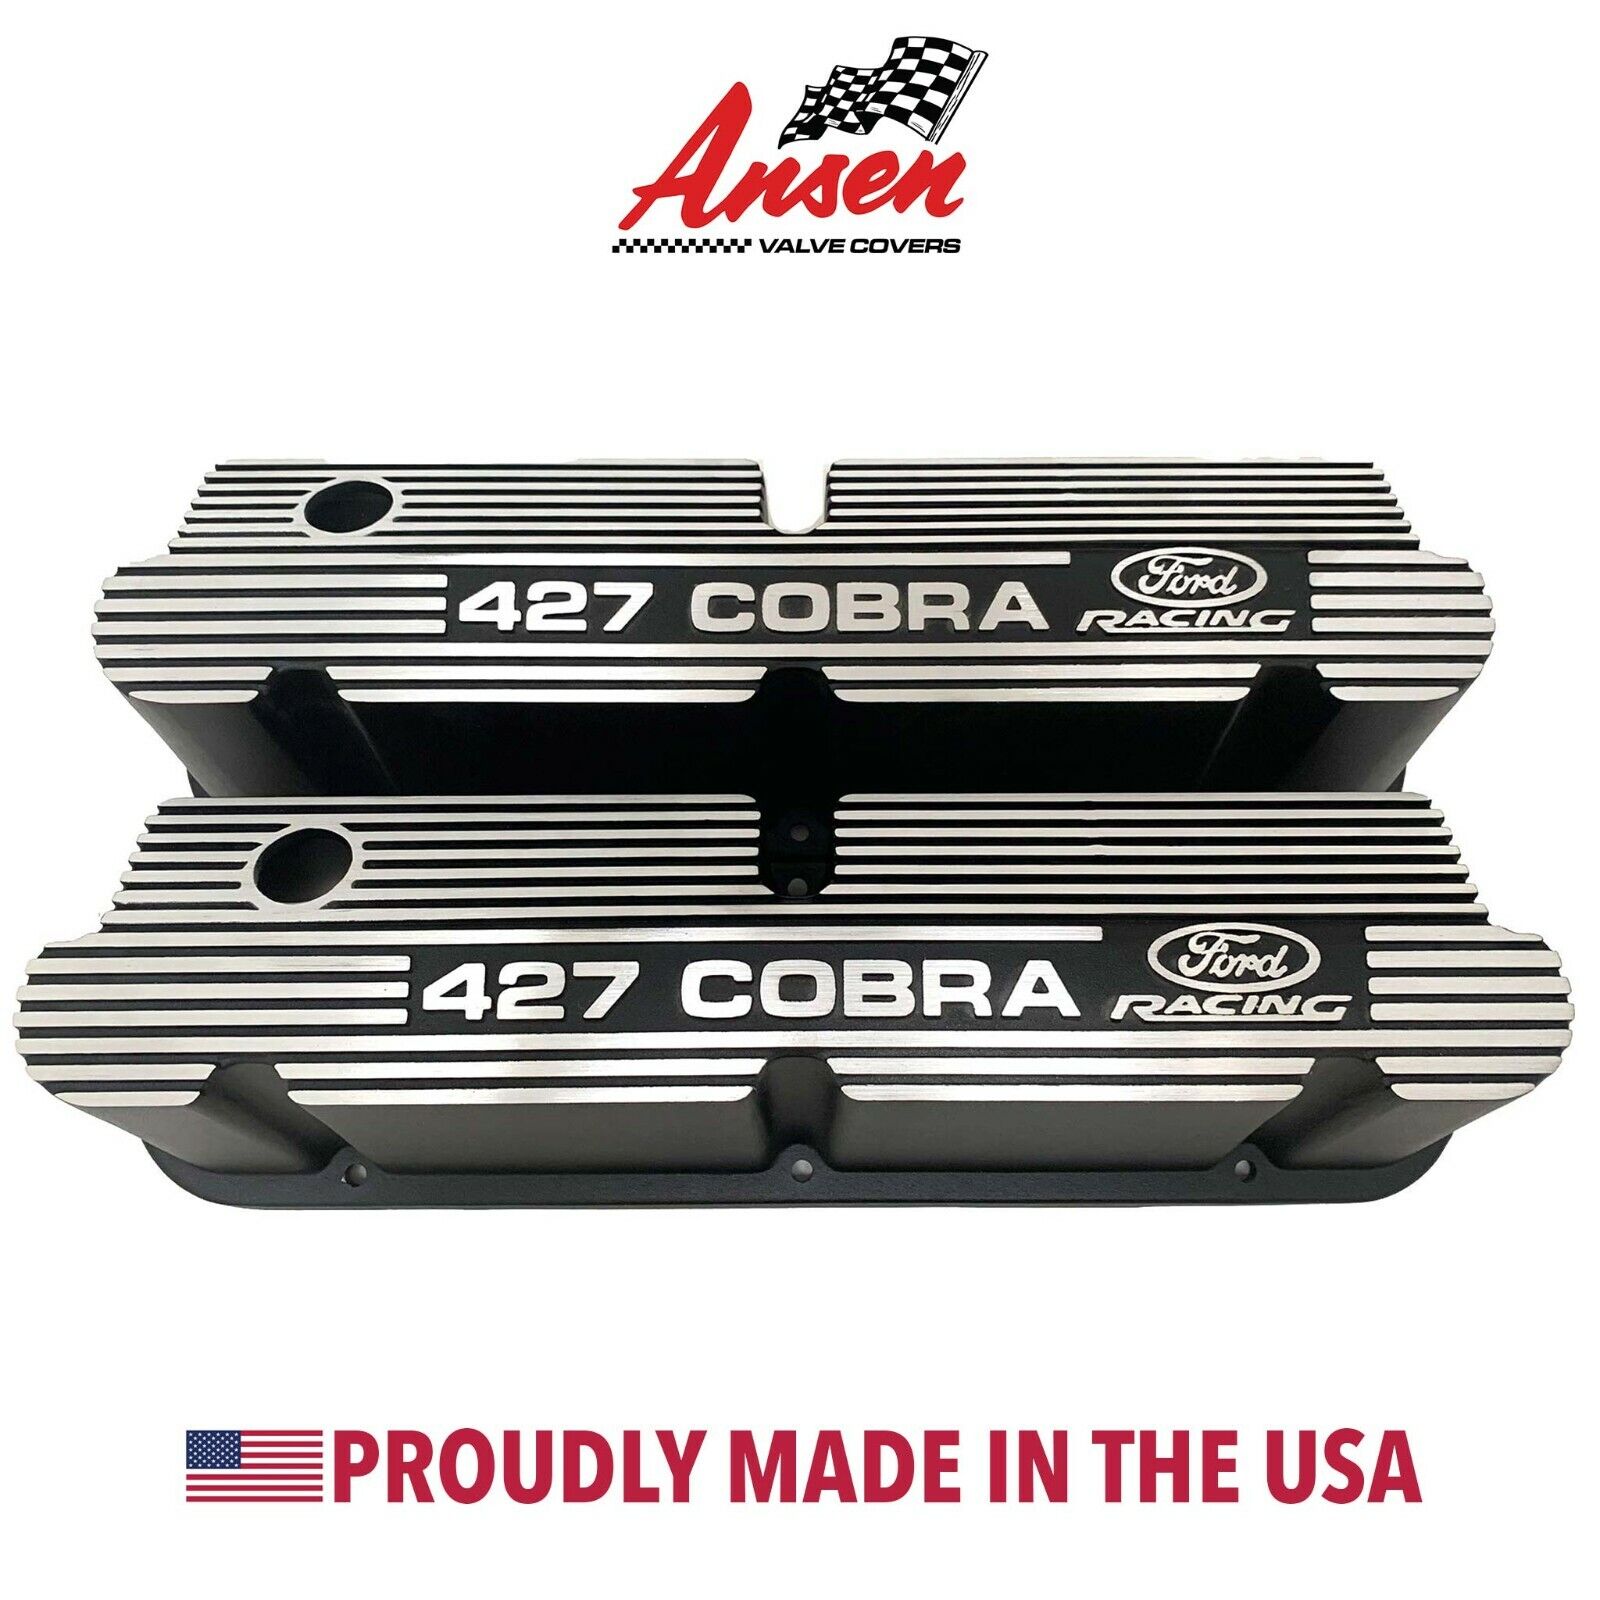 Ford Pentroof 427 Cobra Valve Covers - Black - New Old Stock, Ford M-6582-W427B